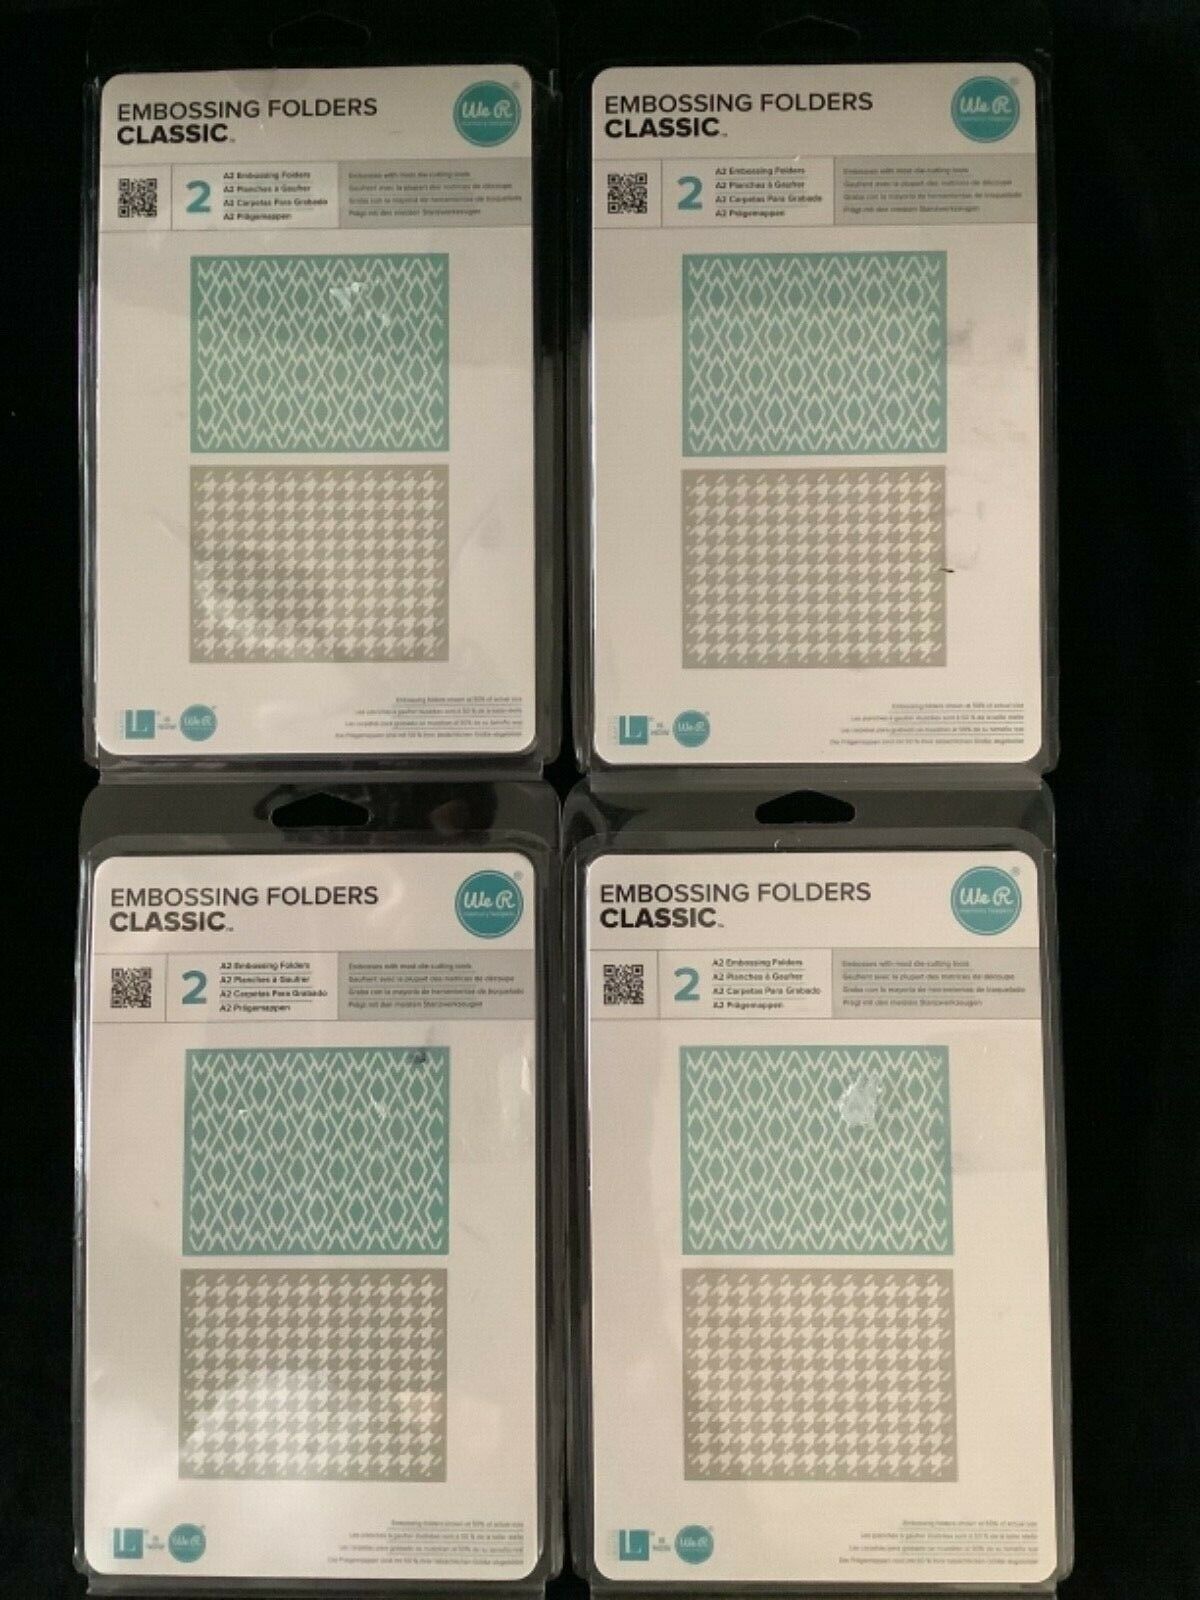 Lifestylecrafts We R Memory Keepers Embossing Folder A2 4.25”x5.5” Lot 4